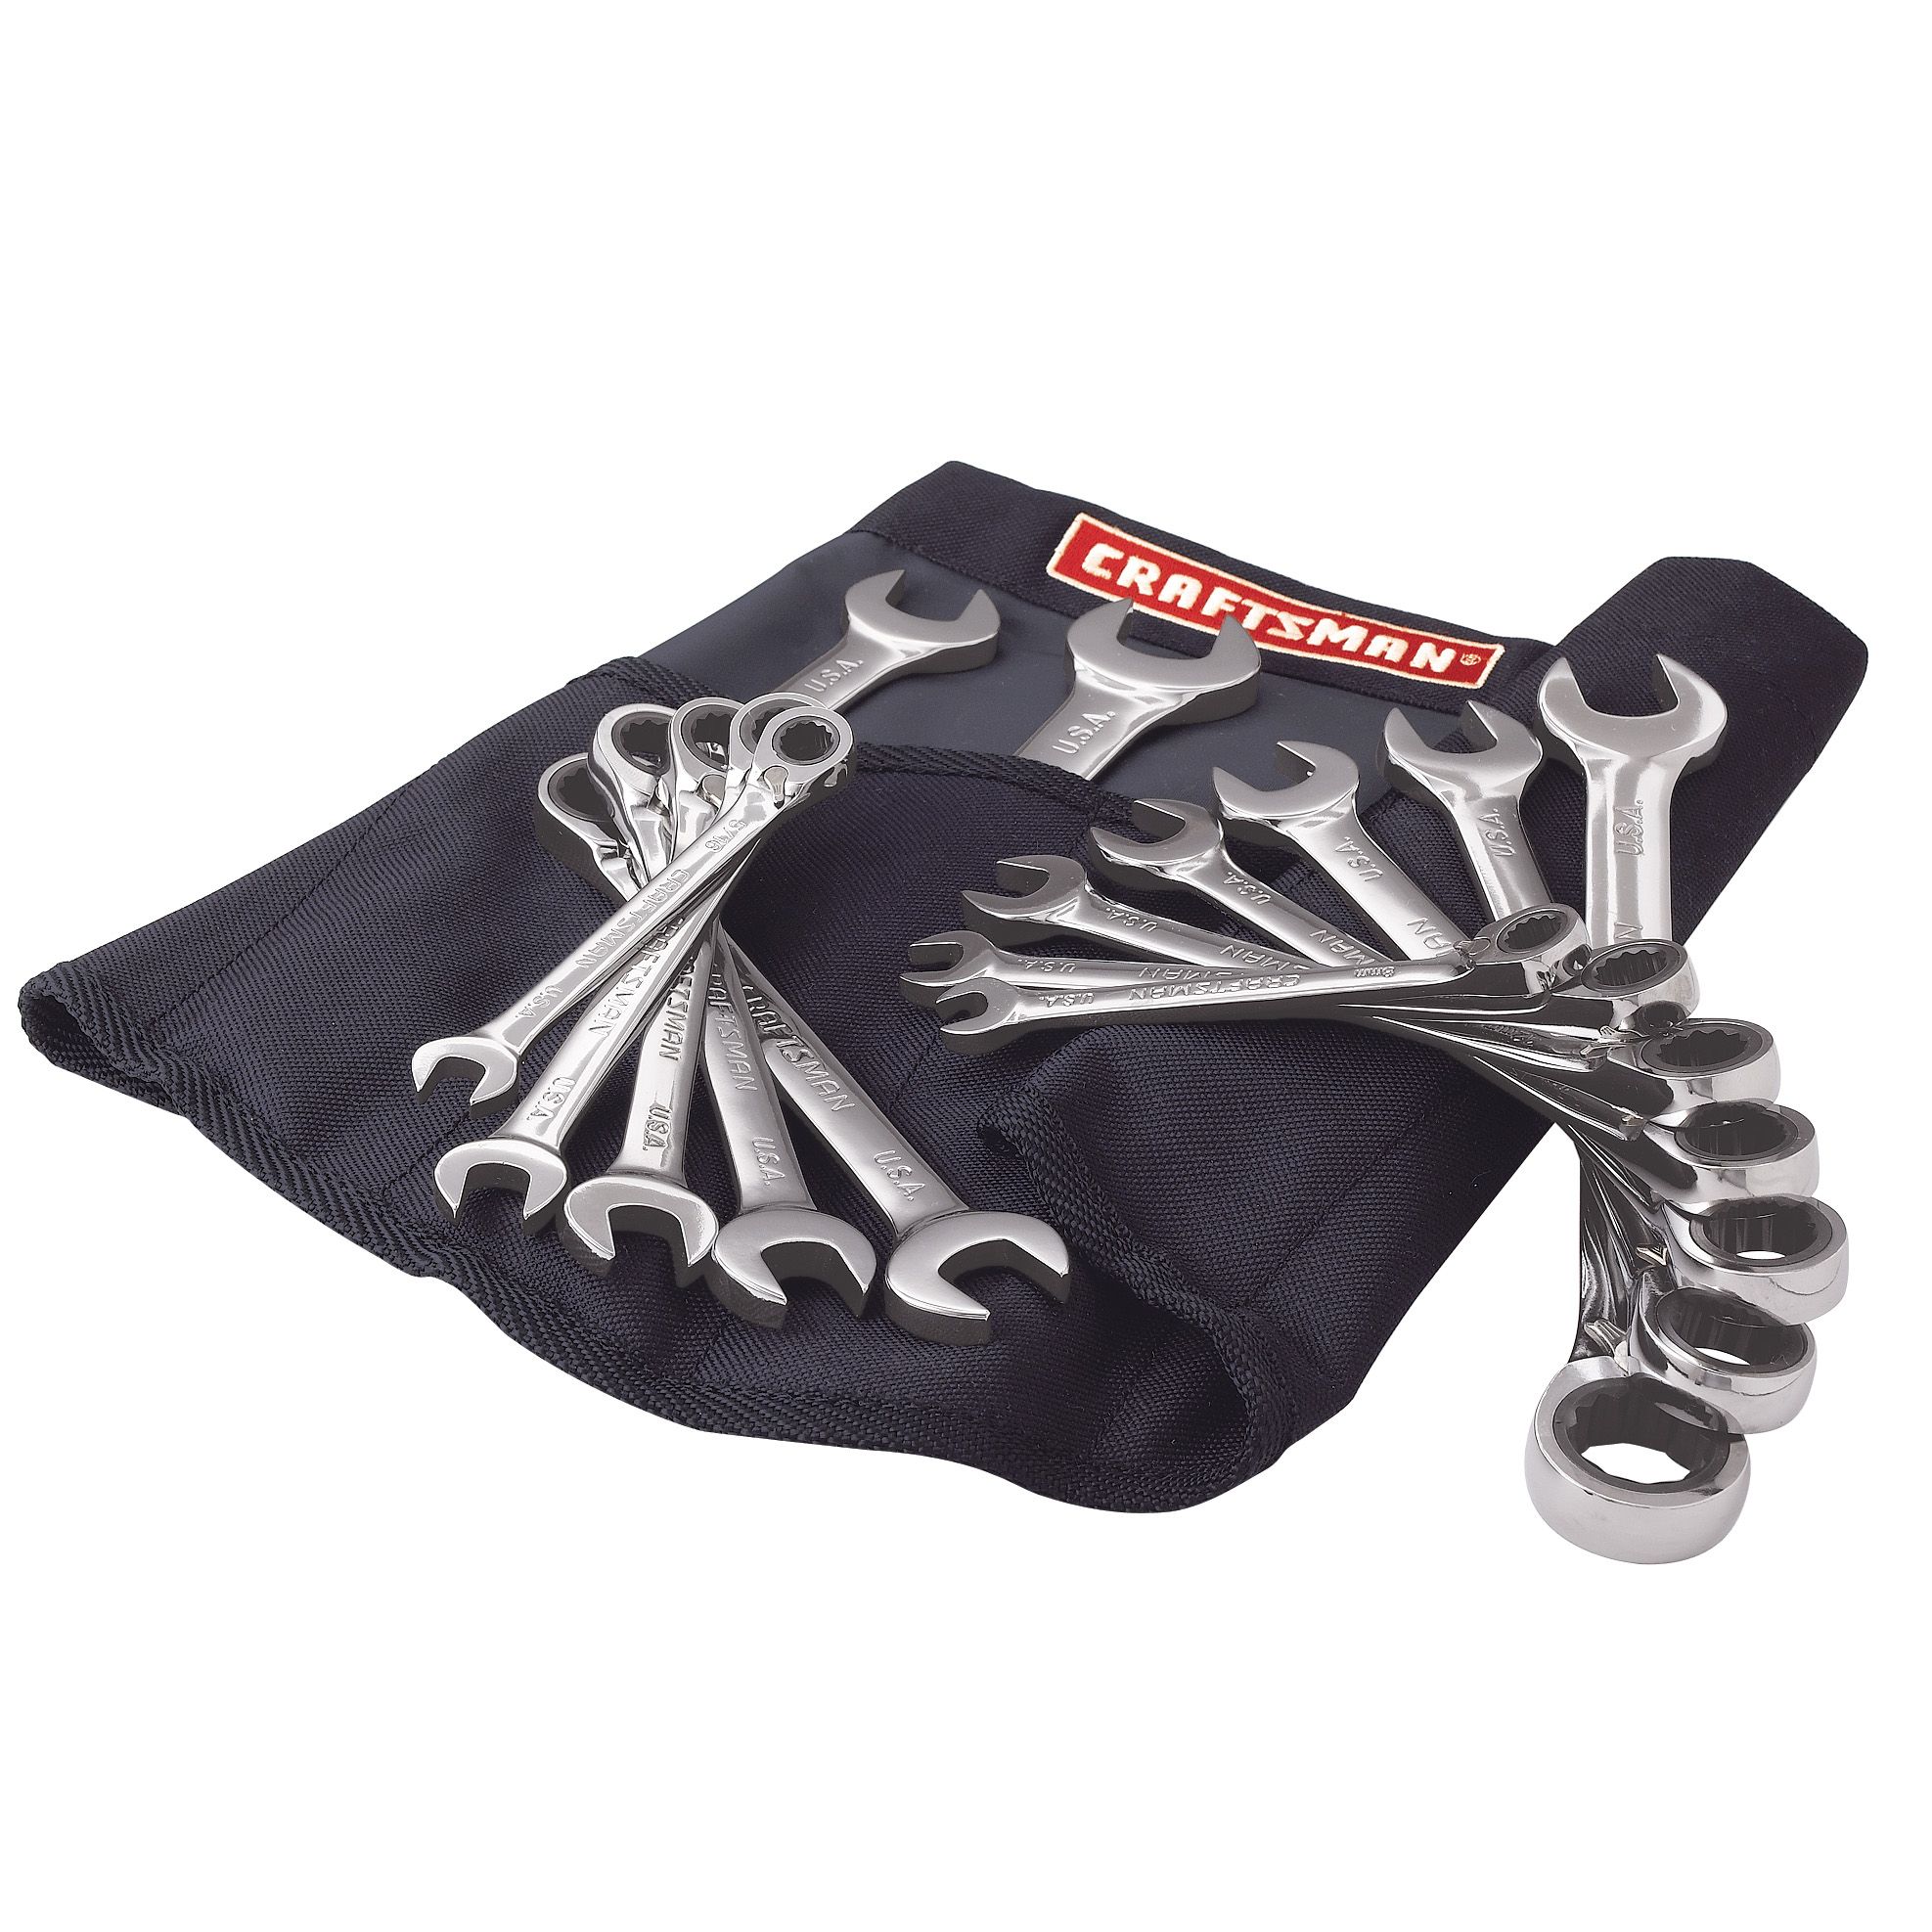 Craftsman 14 pc. Full Polish Reversible Ratcheting Comb. Wrench Set w/ Deluxe Roll Pouch